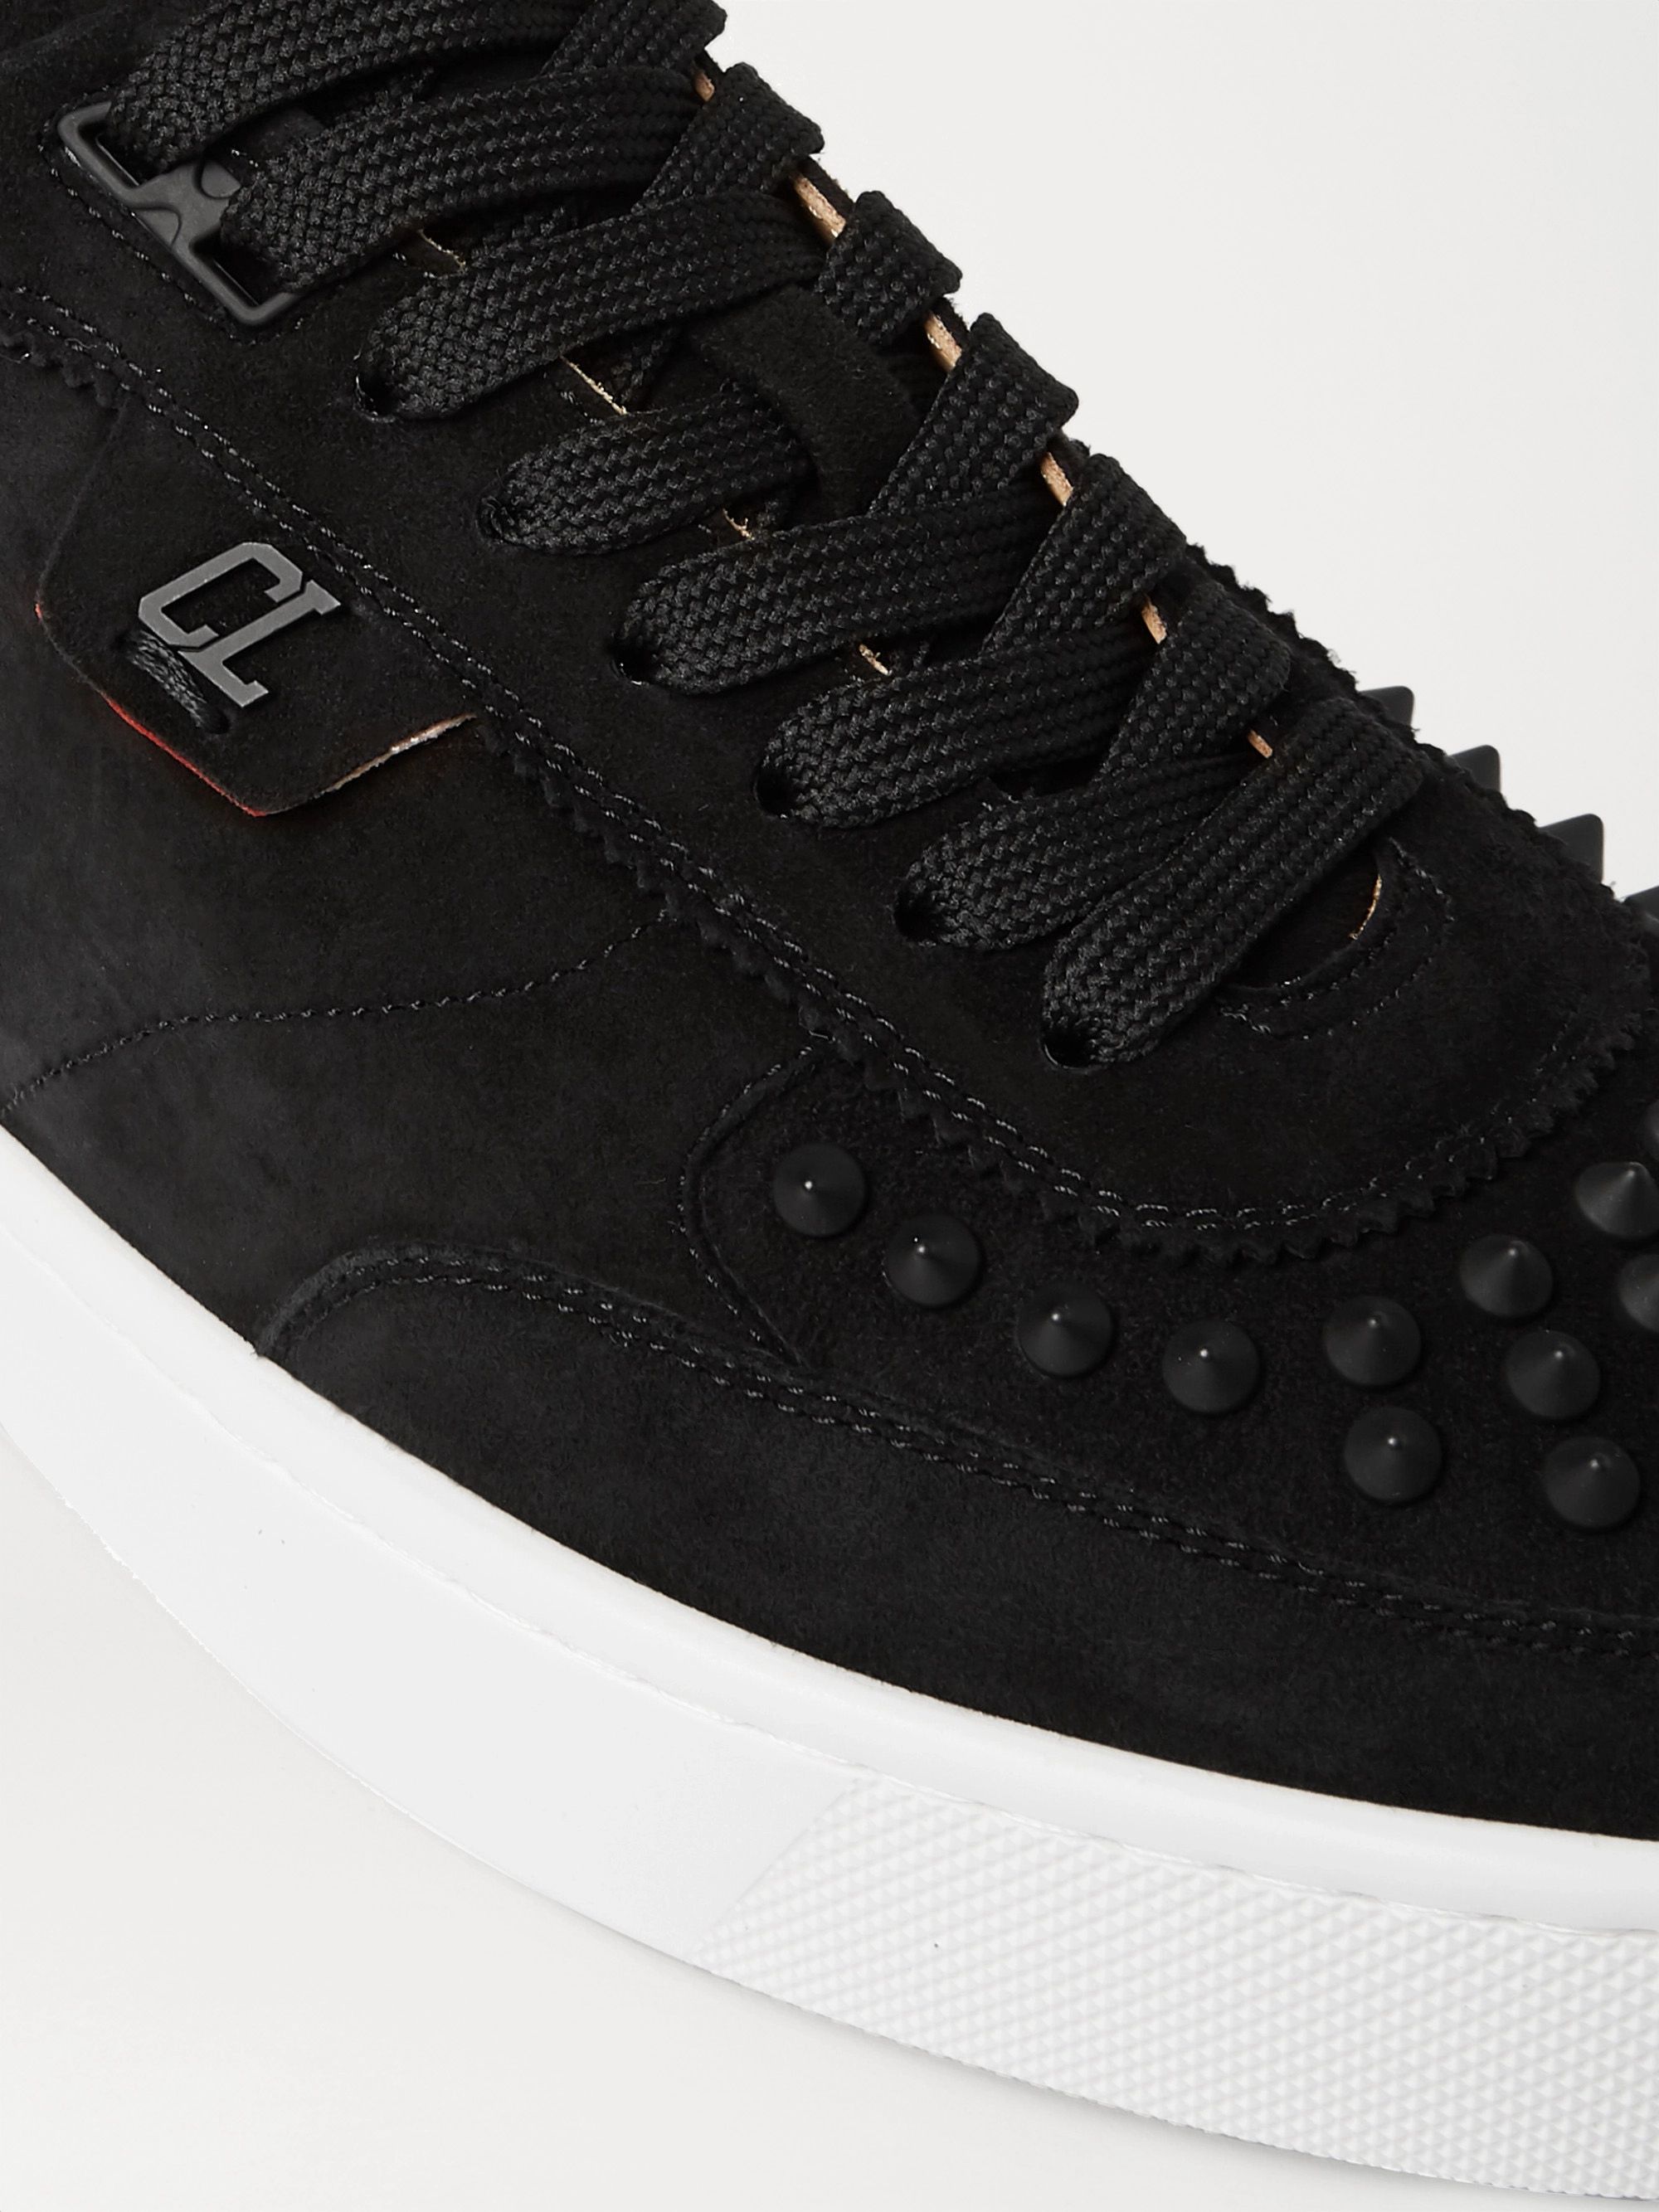 Black Happyrui Spiked Suede Sneakers | CHRISTIAN LOUBOUTIN | MR PORTER